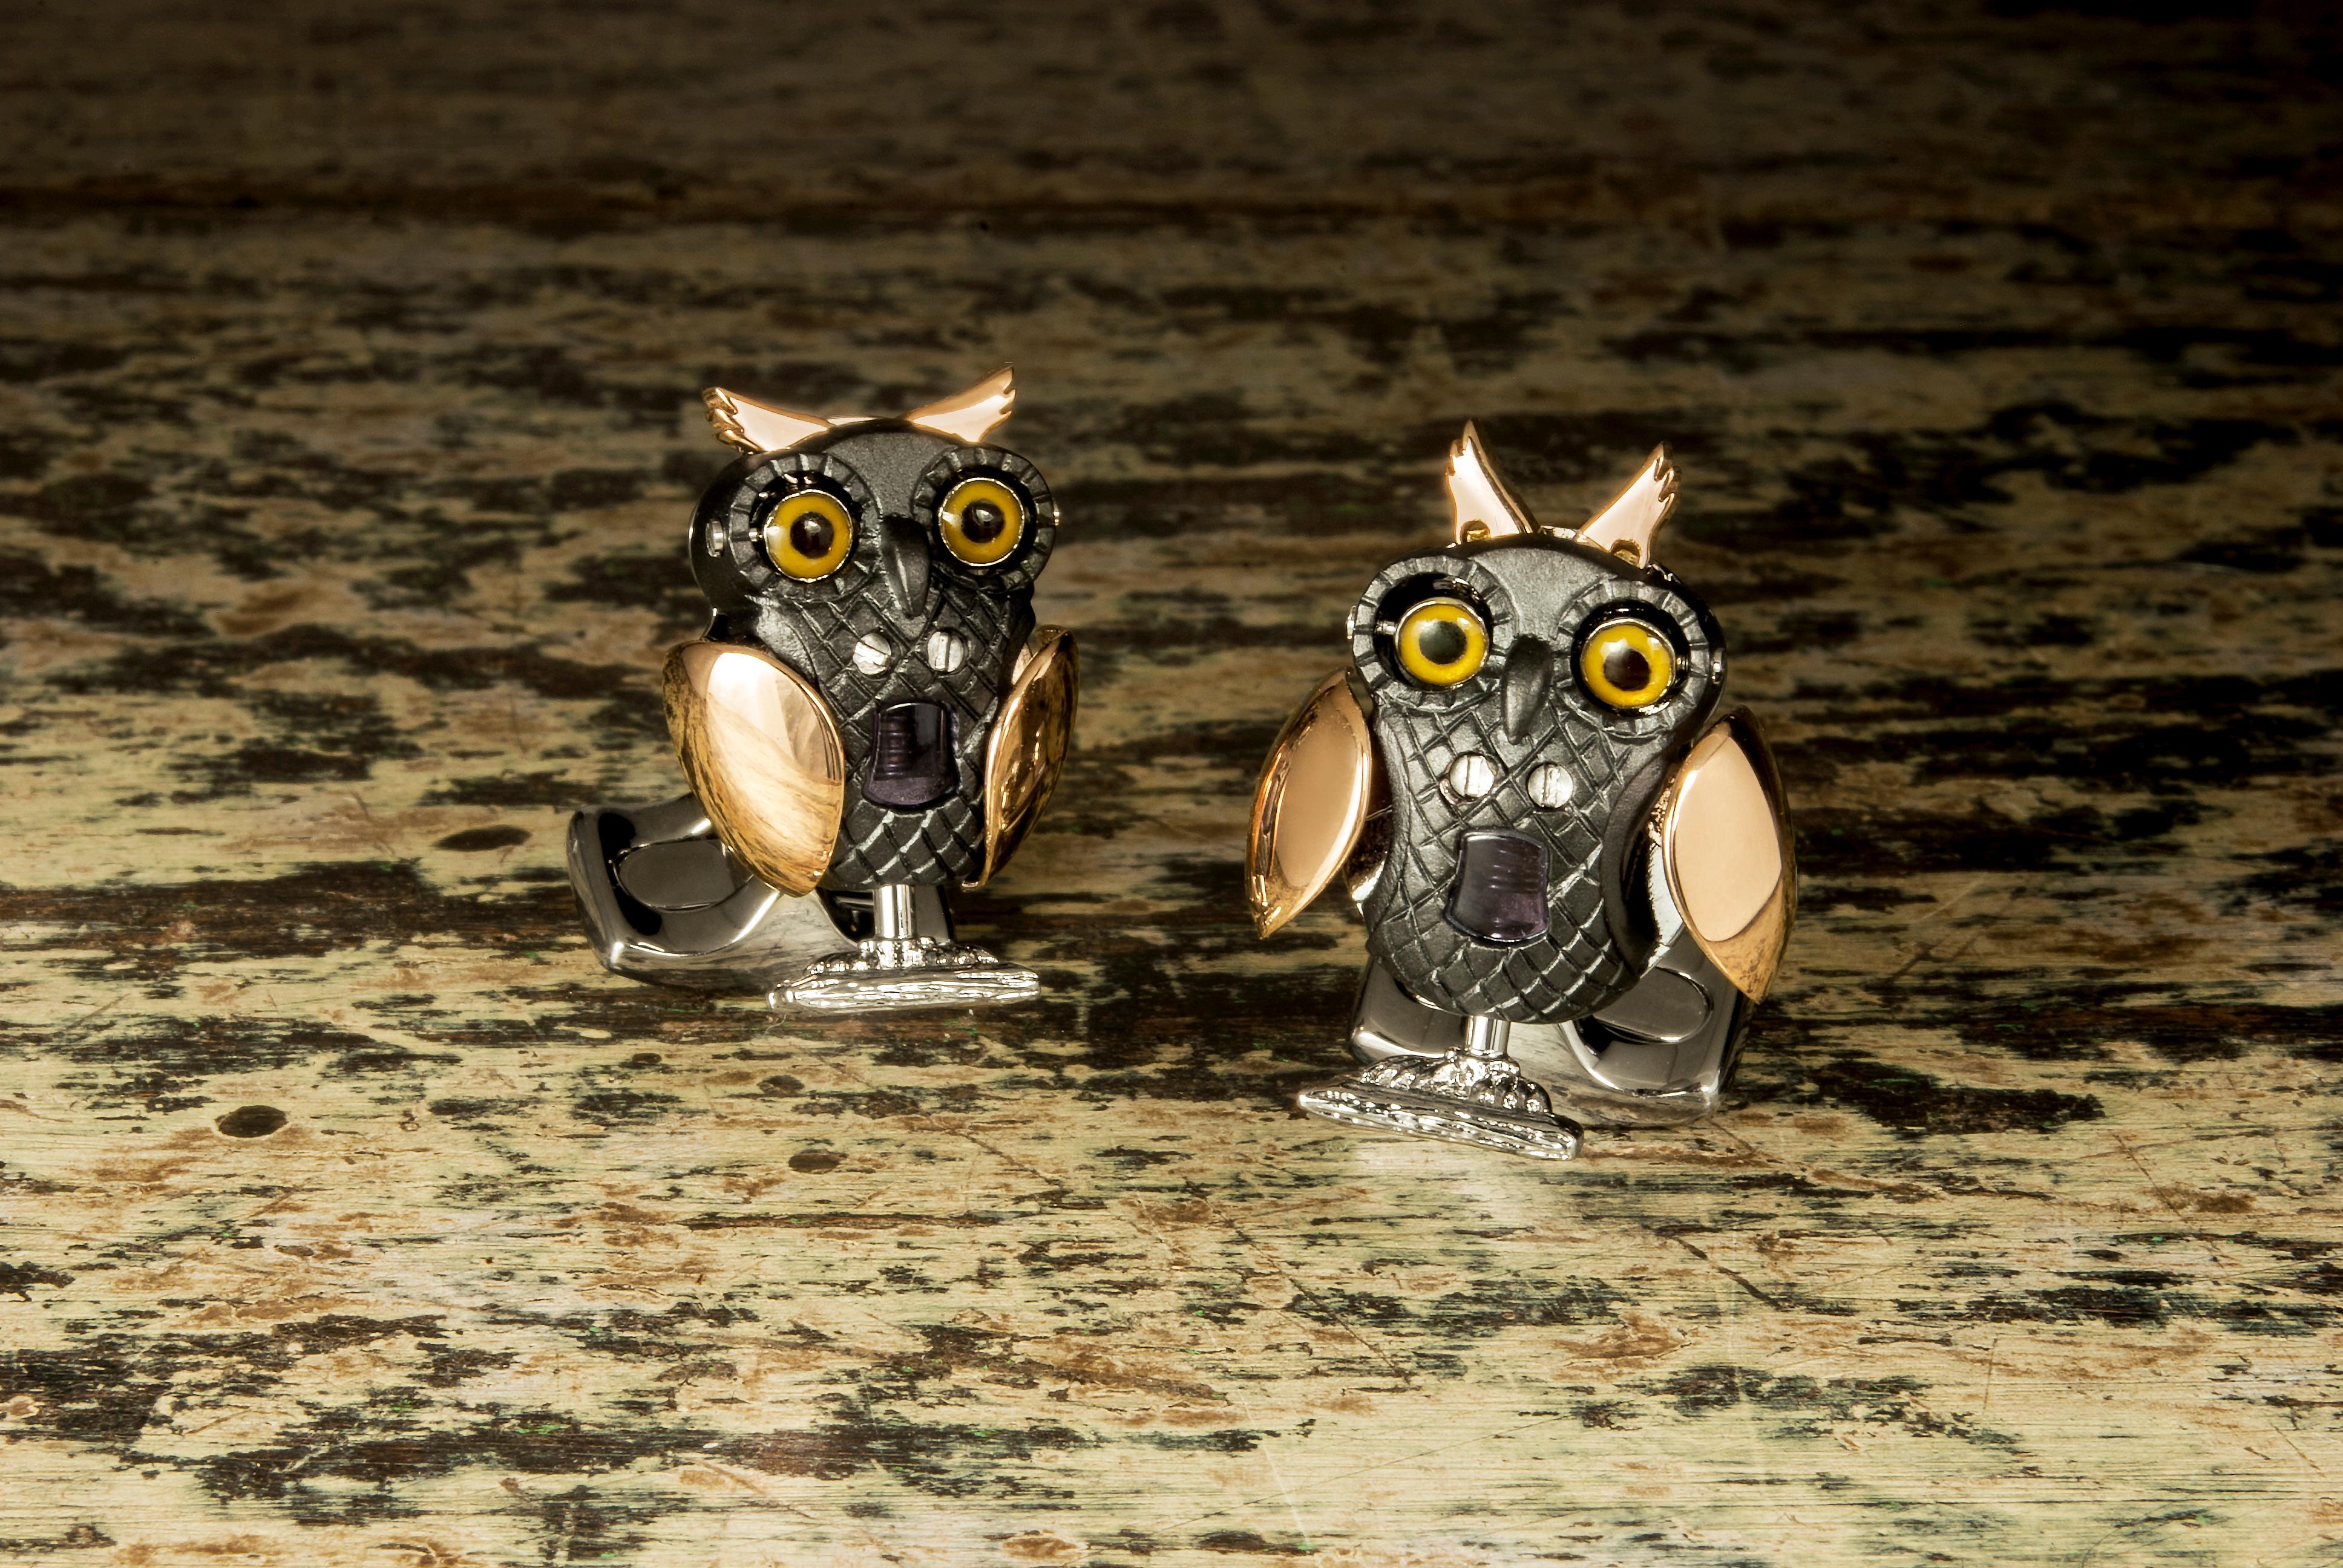 DEAKIN & FRANCIS, Piccadilly Arcade, London.
These beautiful owls have bright beady eyes and a textured, black rhodium body that will sit patiently in wait on your cuff. However, push gently on his feet and watch as his striking gold plated wings